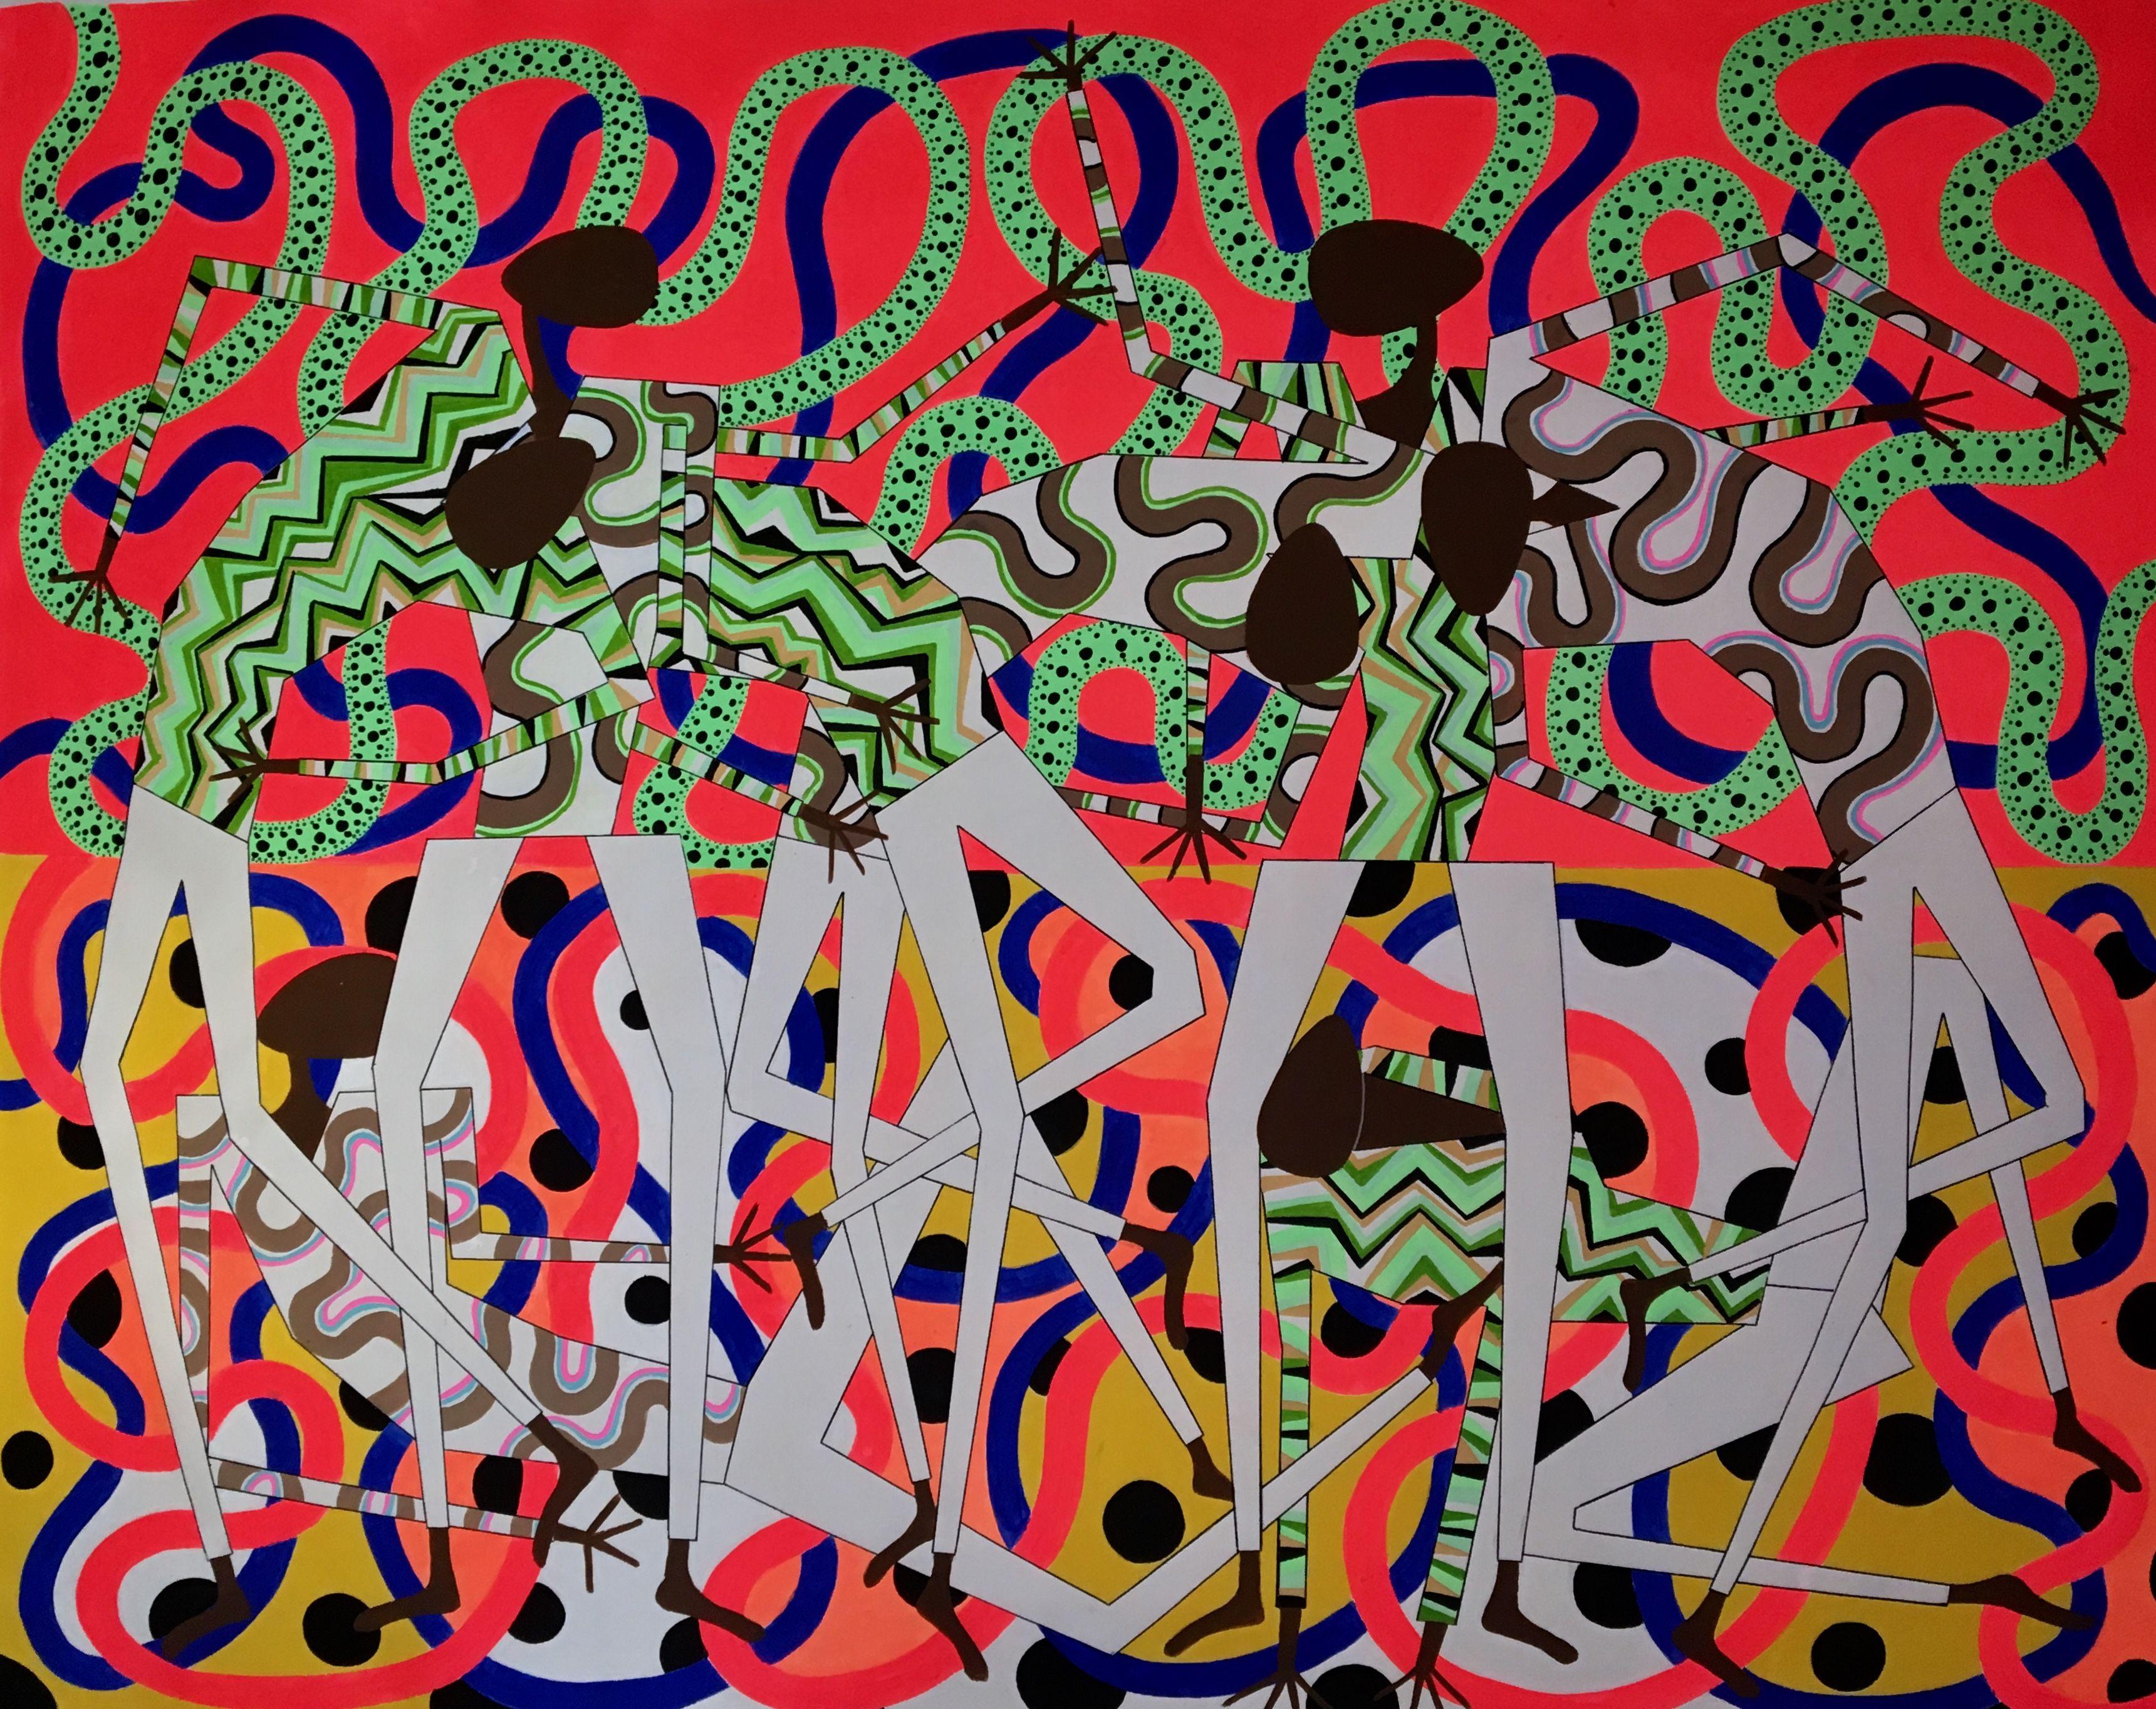 acrylic painting on the canvas inspired by african, Japan and contemporary art directions. CANVAS 163 african-like figures. The figures are on background highly inspired by japan, chinese art. I use high quality and bright colors (montana pigments,